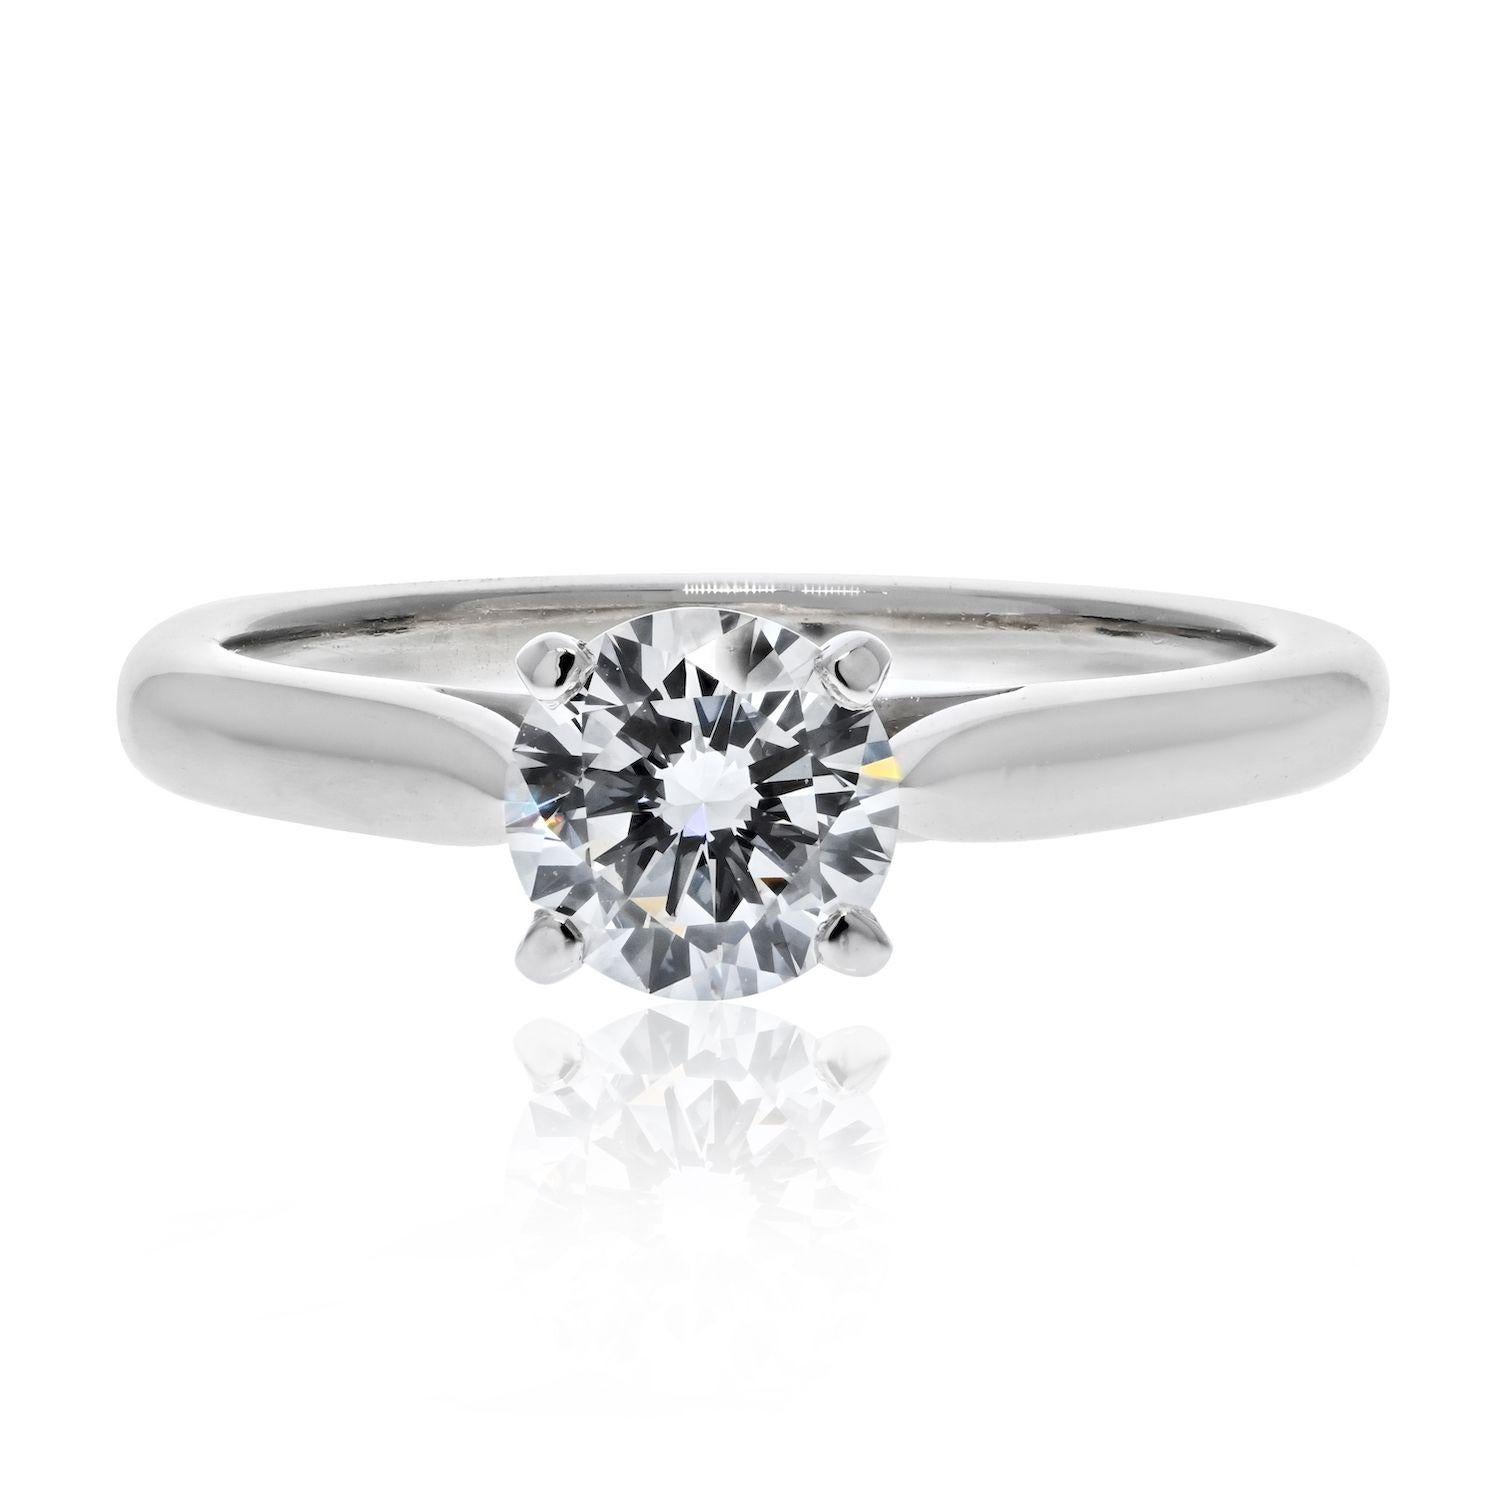 Classic diamond engagement ring by Cartier. Elegant four prong setting with a 0.65 carat round brilliant cut diamond. 
GIA certified G color, VS2 clarity. 
Finger size 4.5.